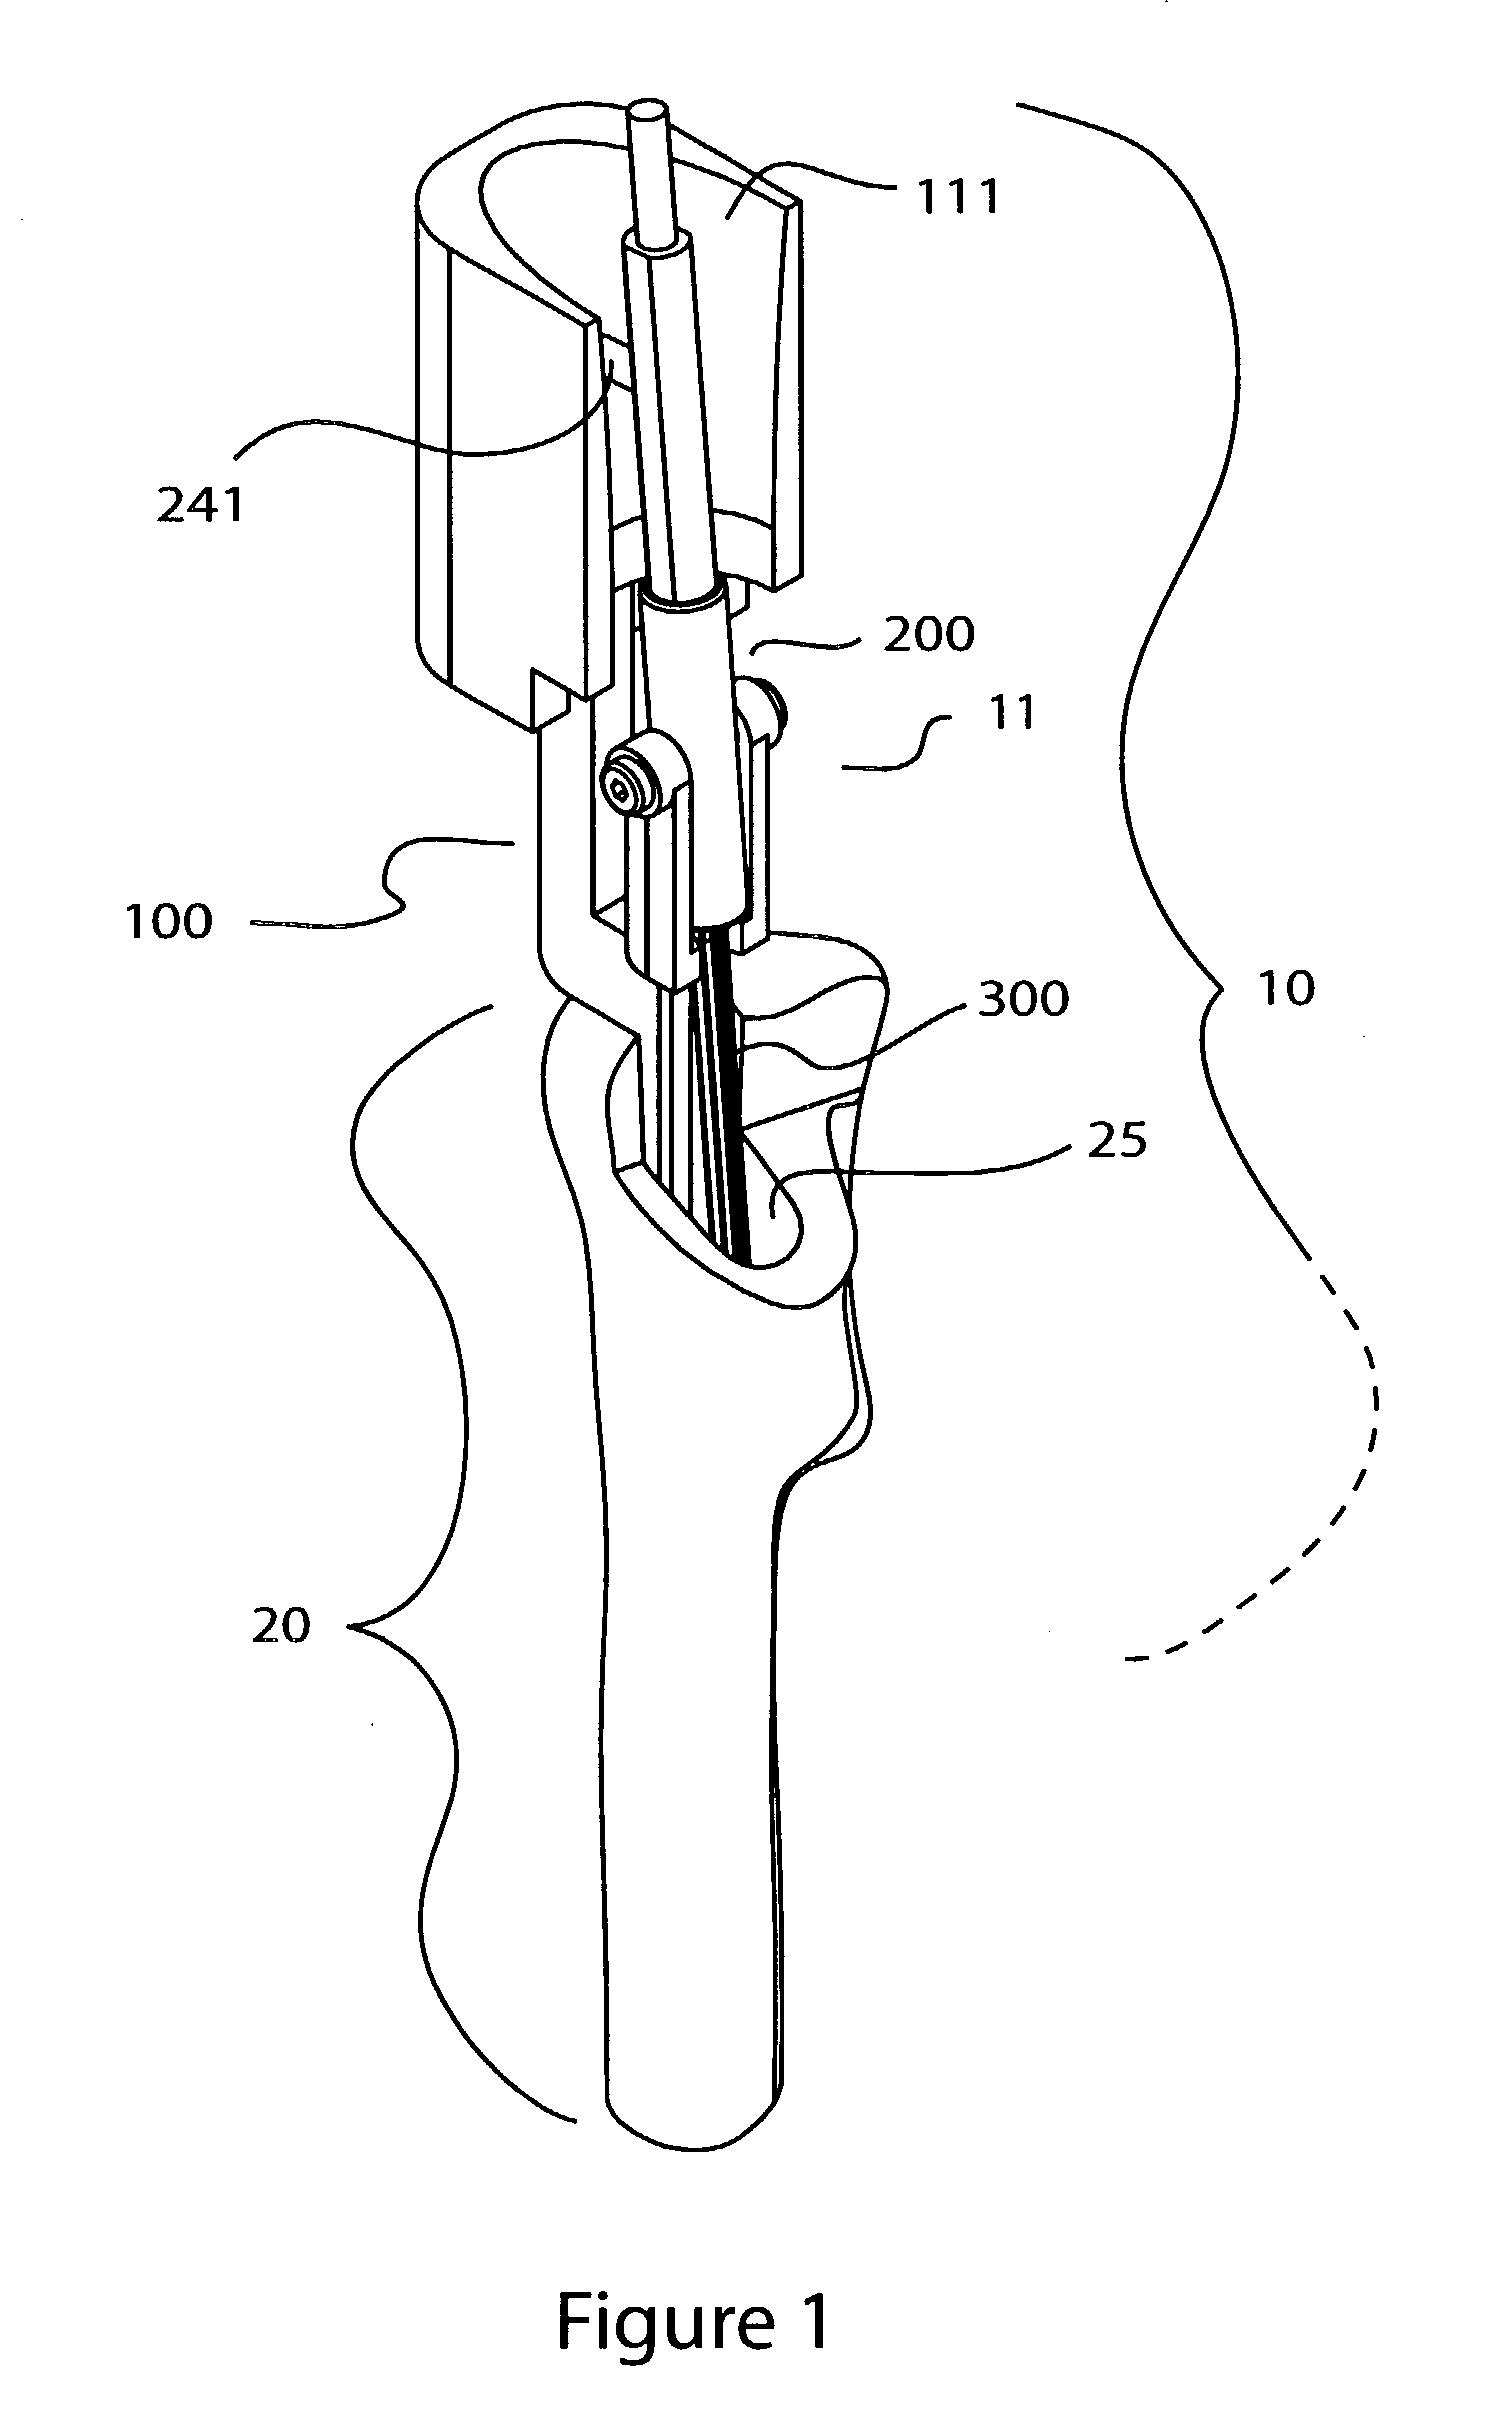 Surgical milling instrument for shaping a bone cavity